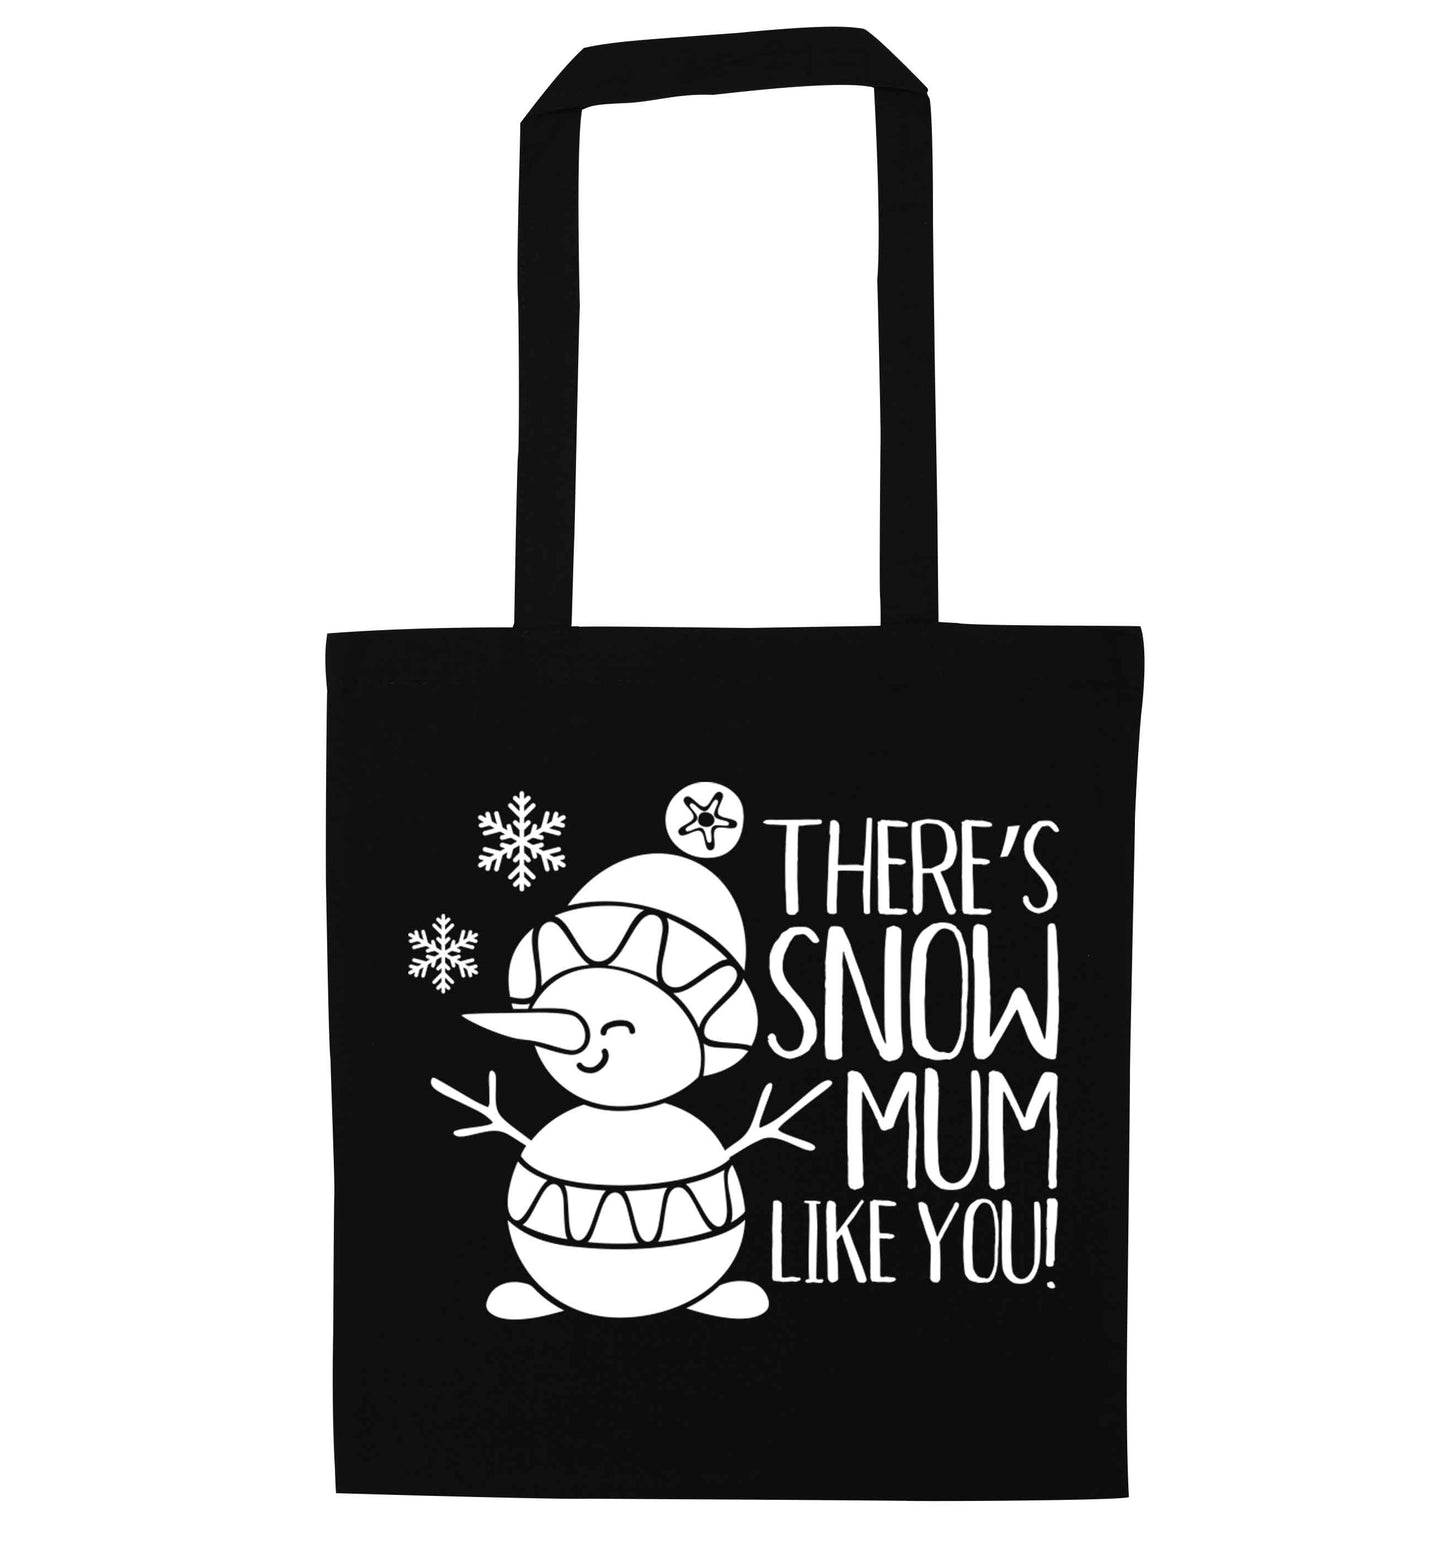 There's snow mum like you black tote bag